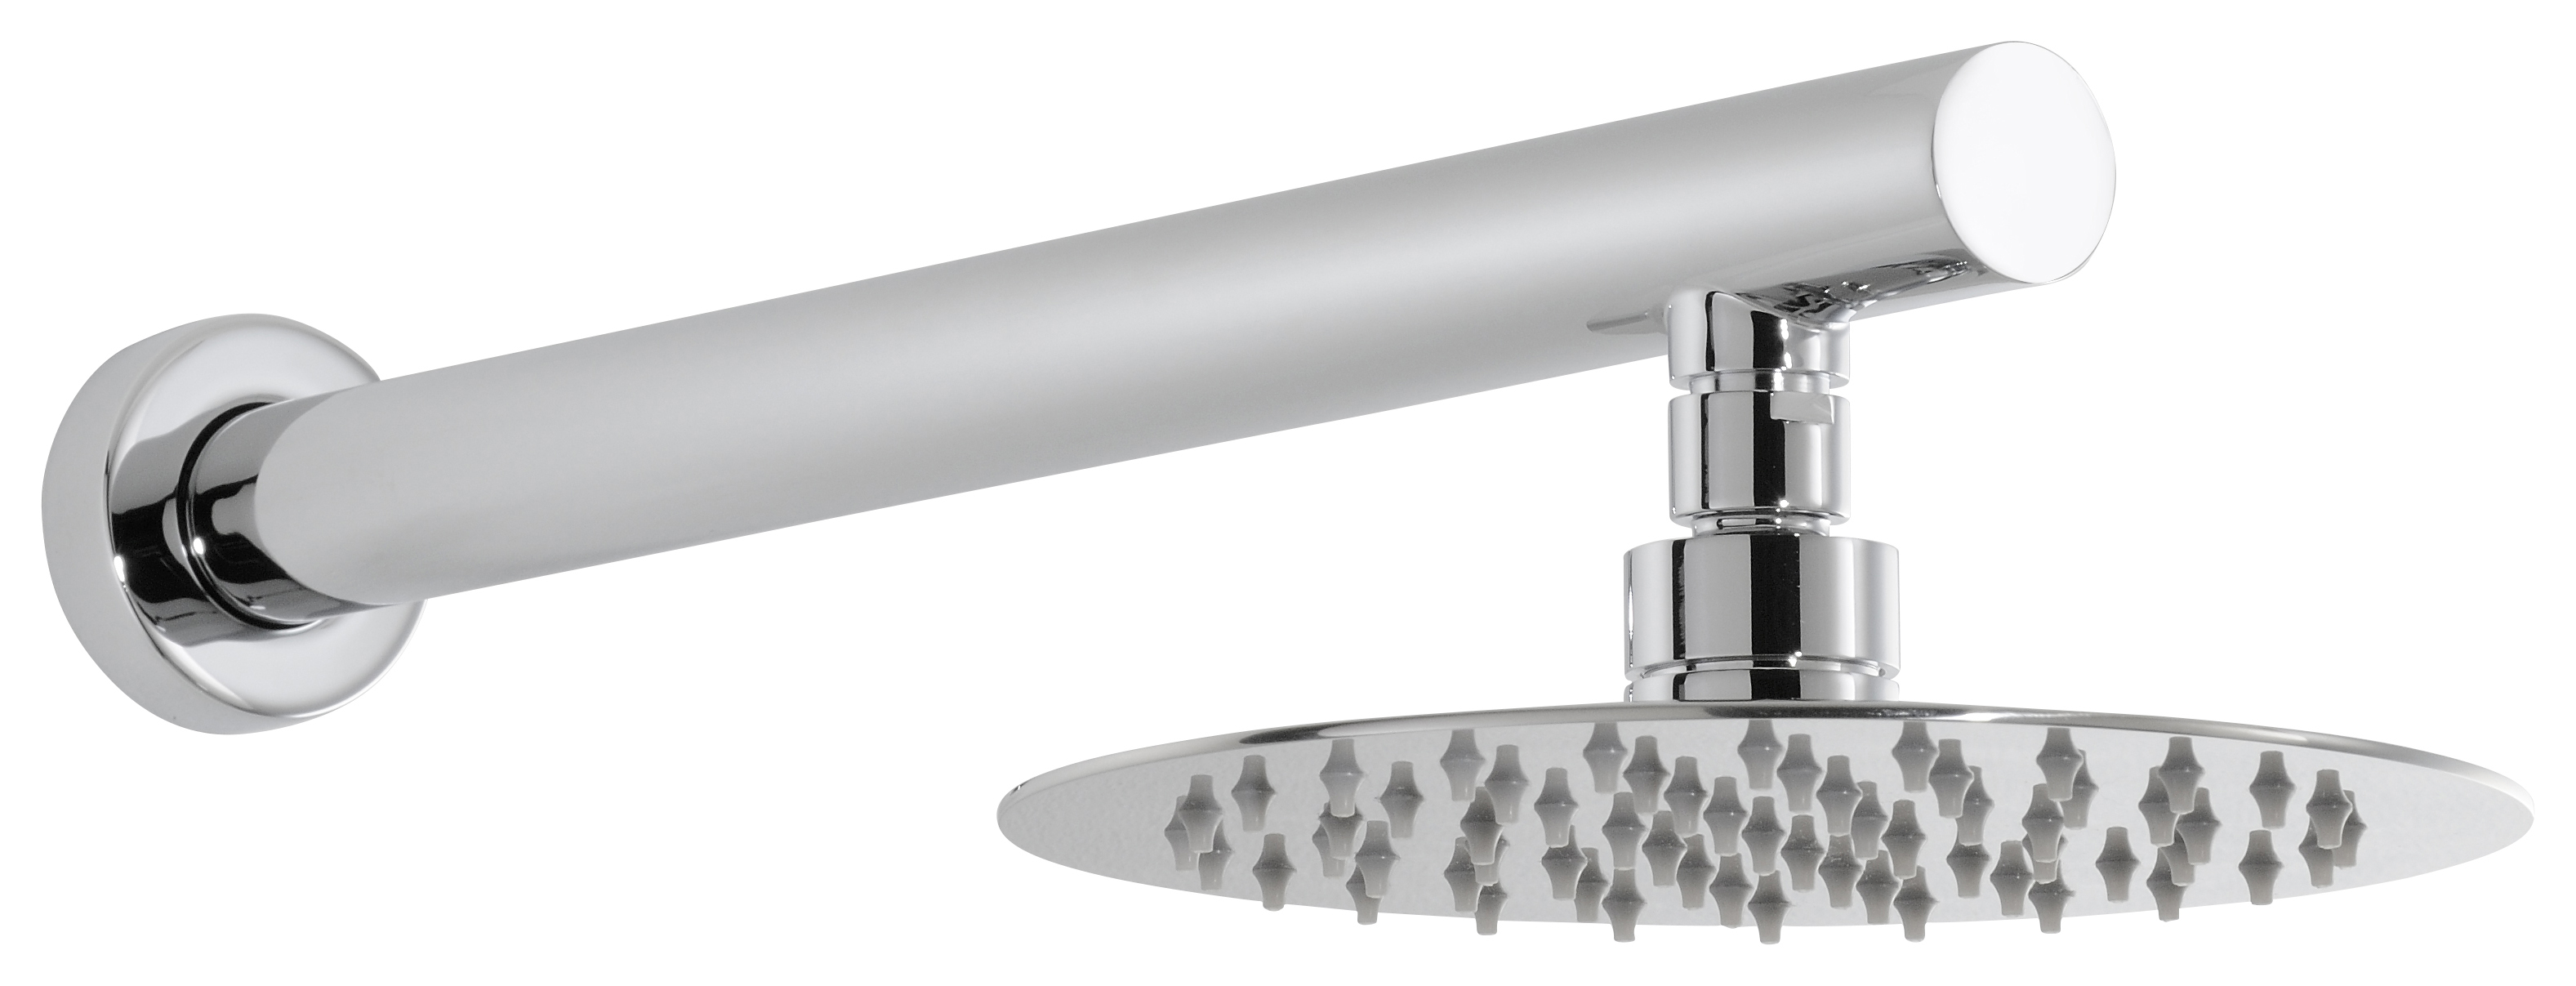 Image of Abode Storm Chrome Wall Mounted Round Shower Head & Arm - 200mm